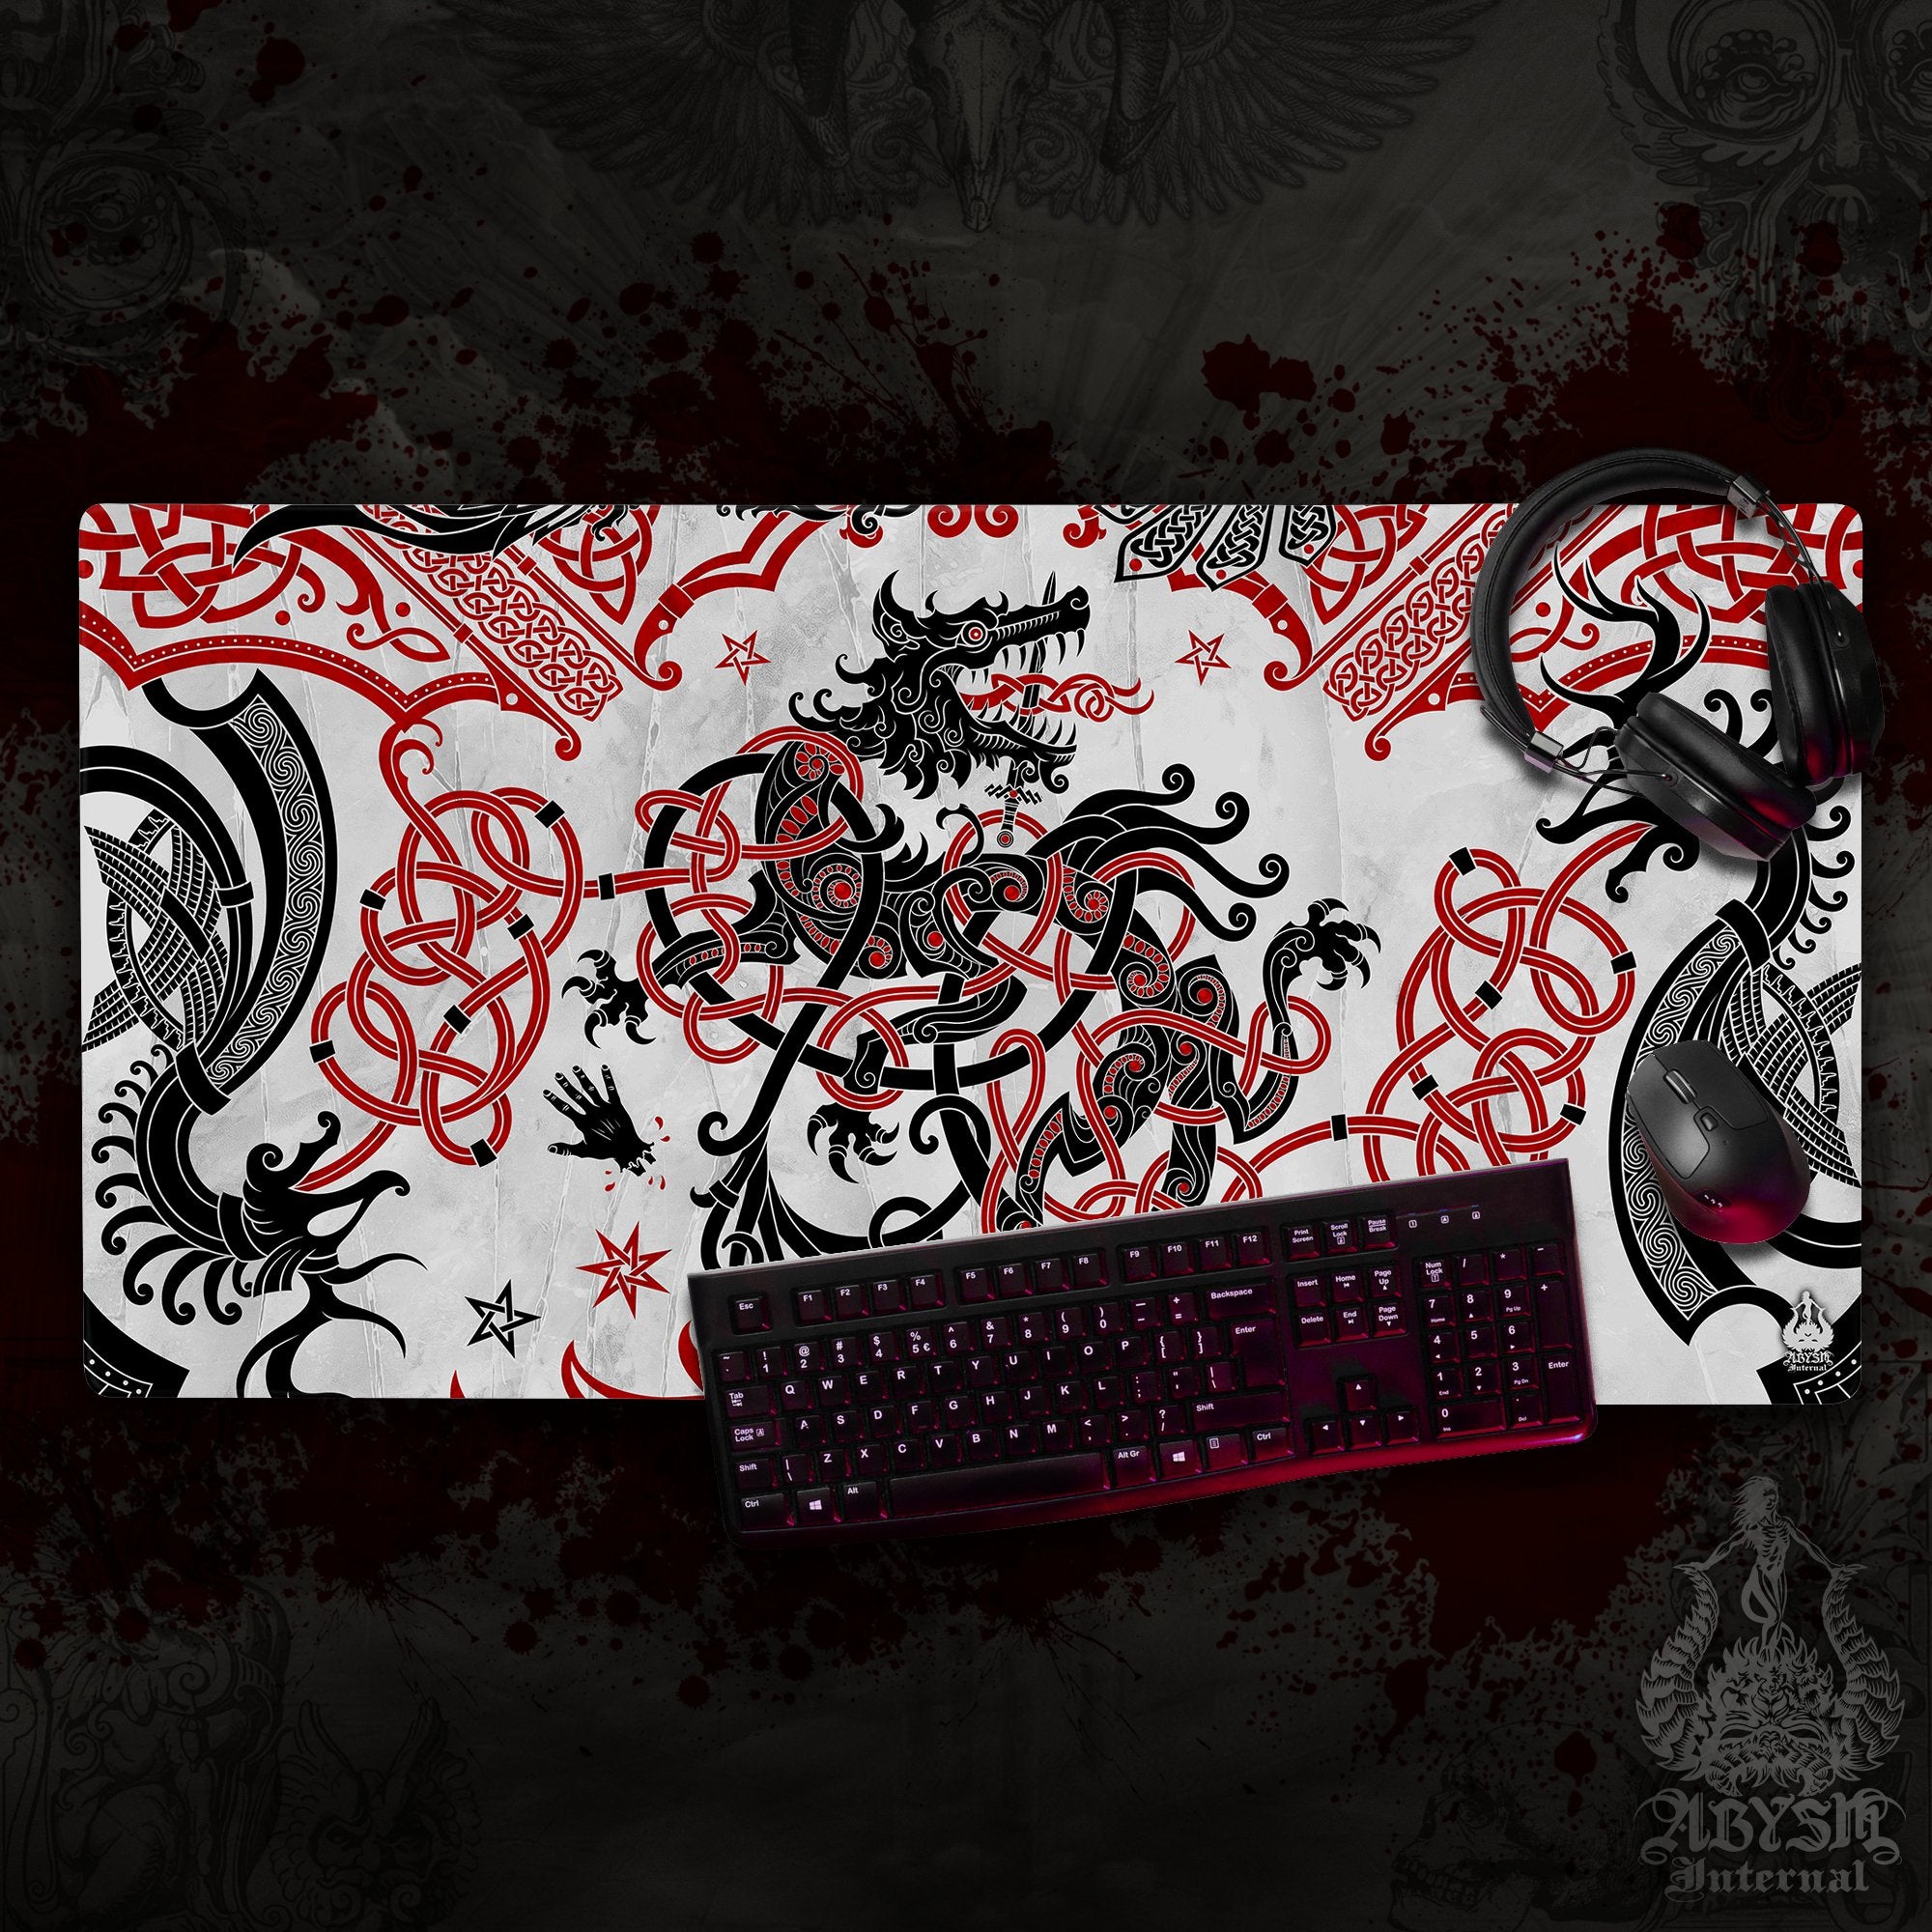 Norse Wolf Gaming Desk Mat, Viking Mouse Pad, Fenrir Table Protector Cover, Nordic Knotwork Workpad, Art Print - White Black Red - Abysm Internal